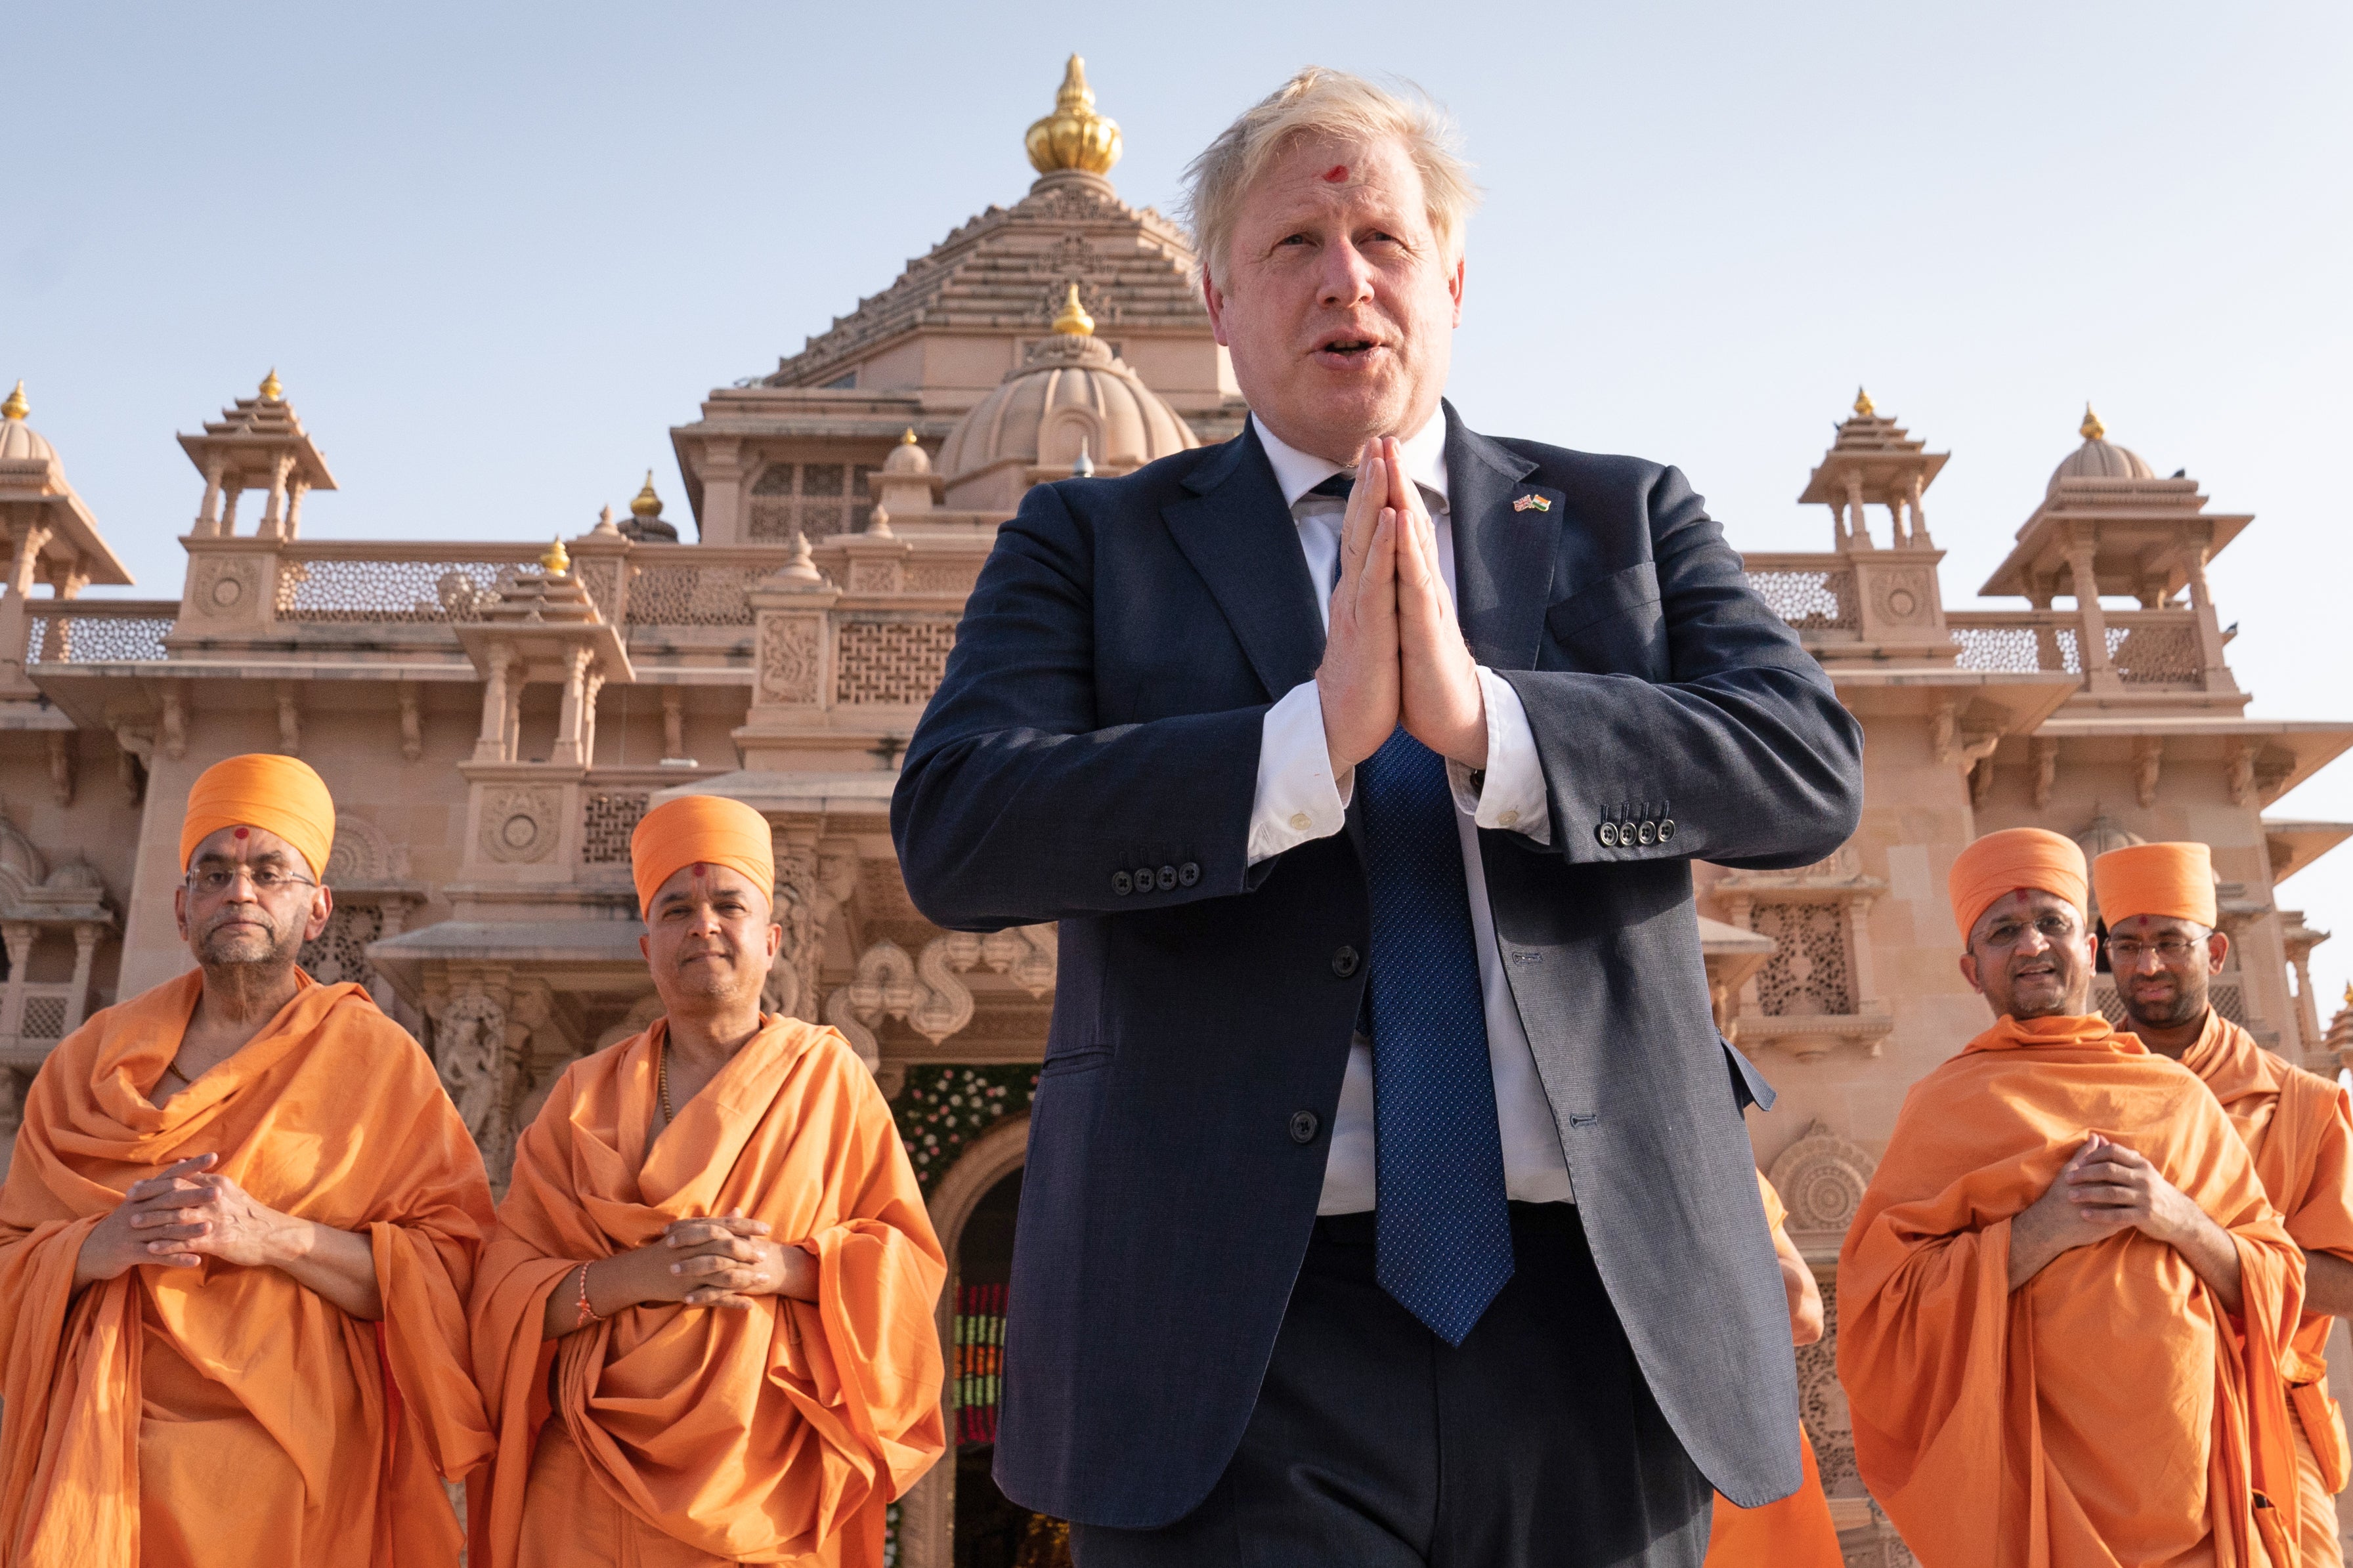 Boris Johnson has called partnership between the UK and India ‘vital’, ahead of a meeting with his Indian counterpart Narendra Modi in New Delhi on Friday (Stefan Rousseau/PA)